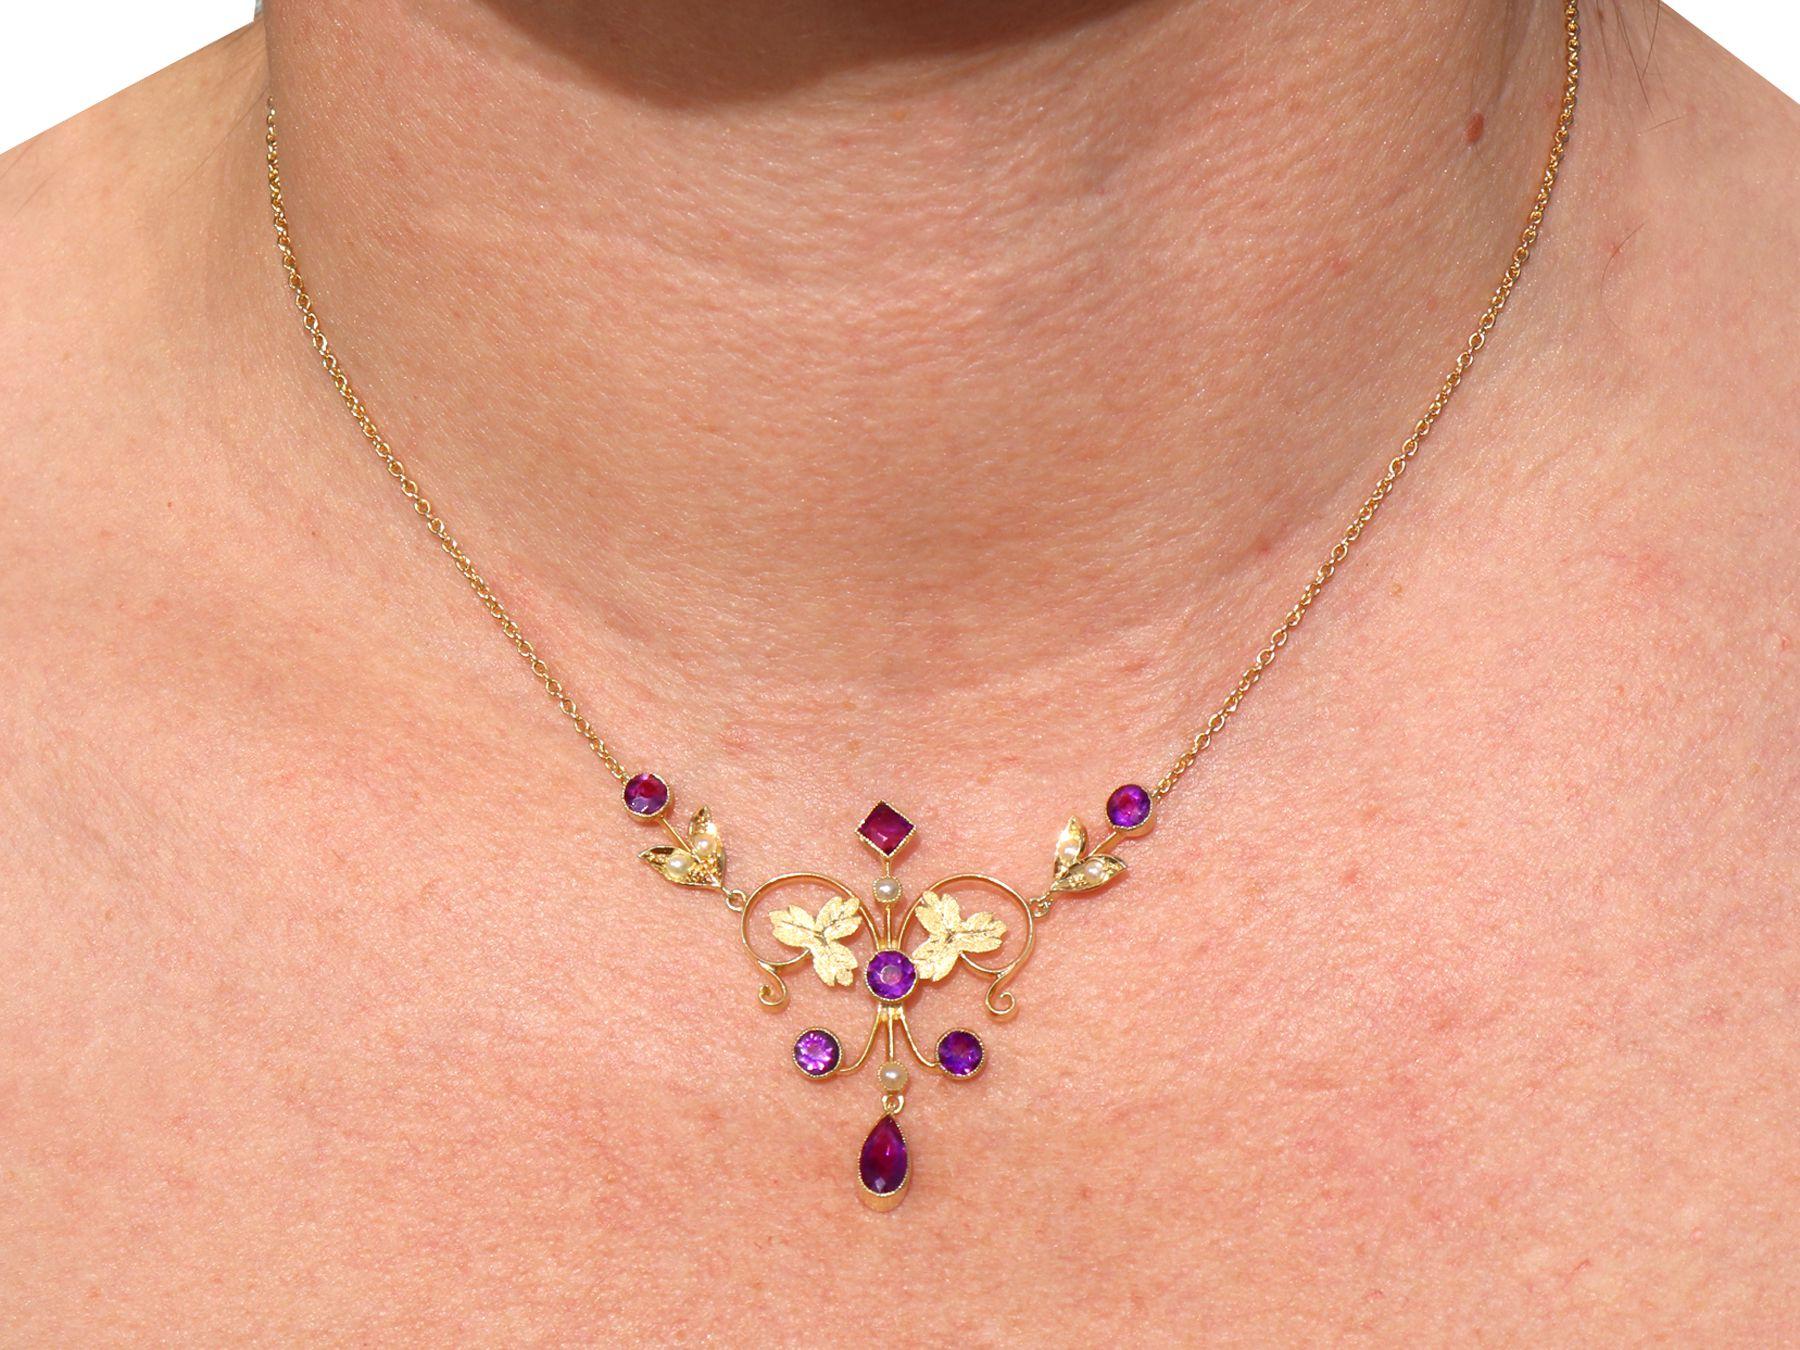 Antique 1.45 Carat Amethyst and Seed Pearl Yellow Gold Necklace In Excellent Condition For Sale In Jesmond, Newcastle Upon Tyne